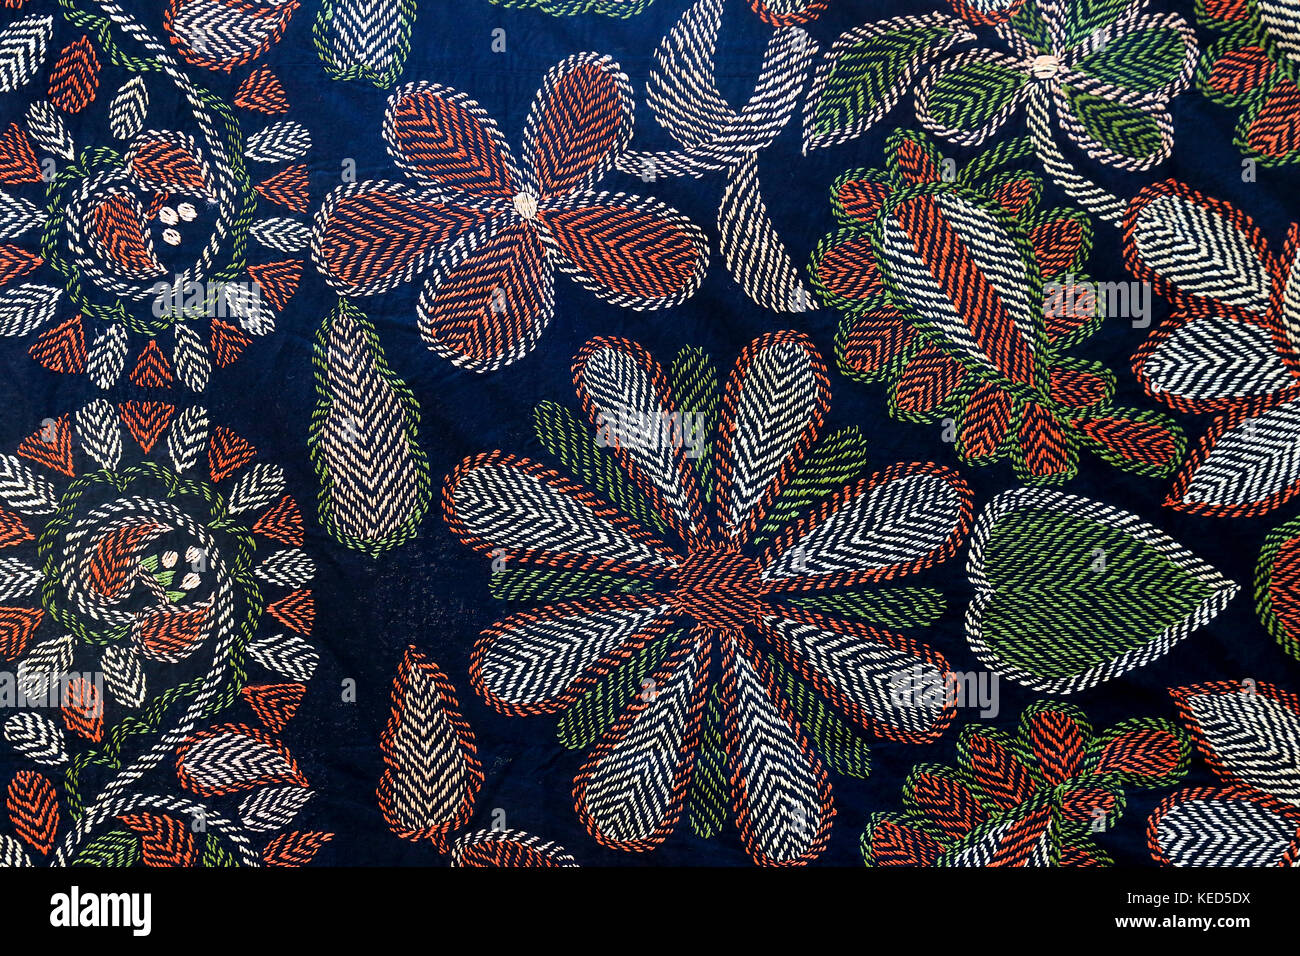 Nakskhi kantha, the embroidered quilt, treated as a piece of folk artistry for its rare beauty, colour and design. Jessore, Bangladesh. Stock Photo